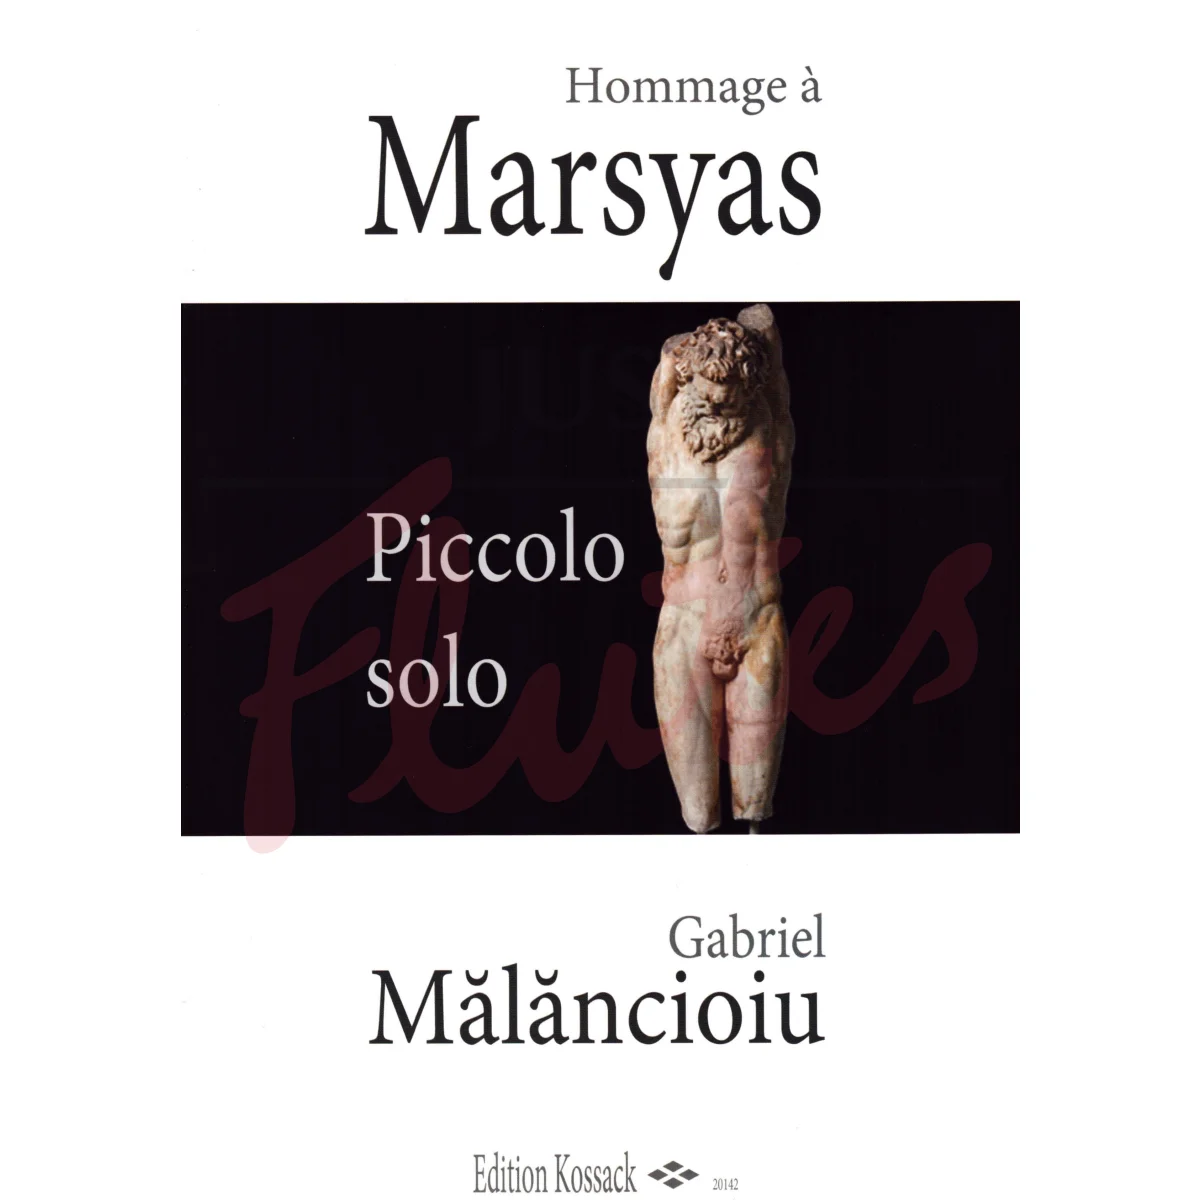 Hommage a Marsyas for Solo Piccolo